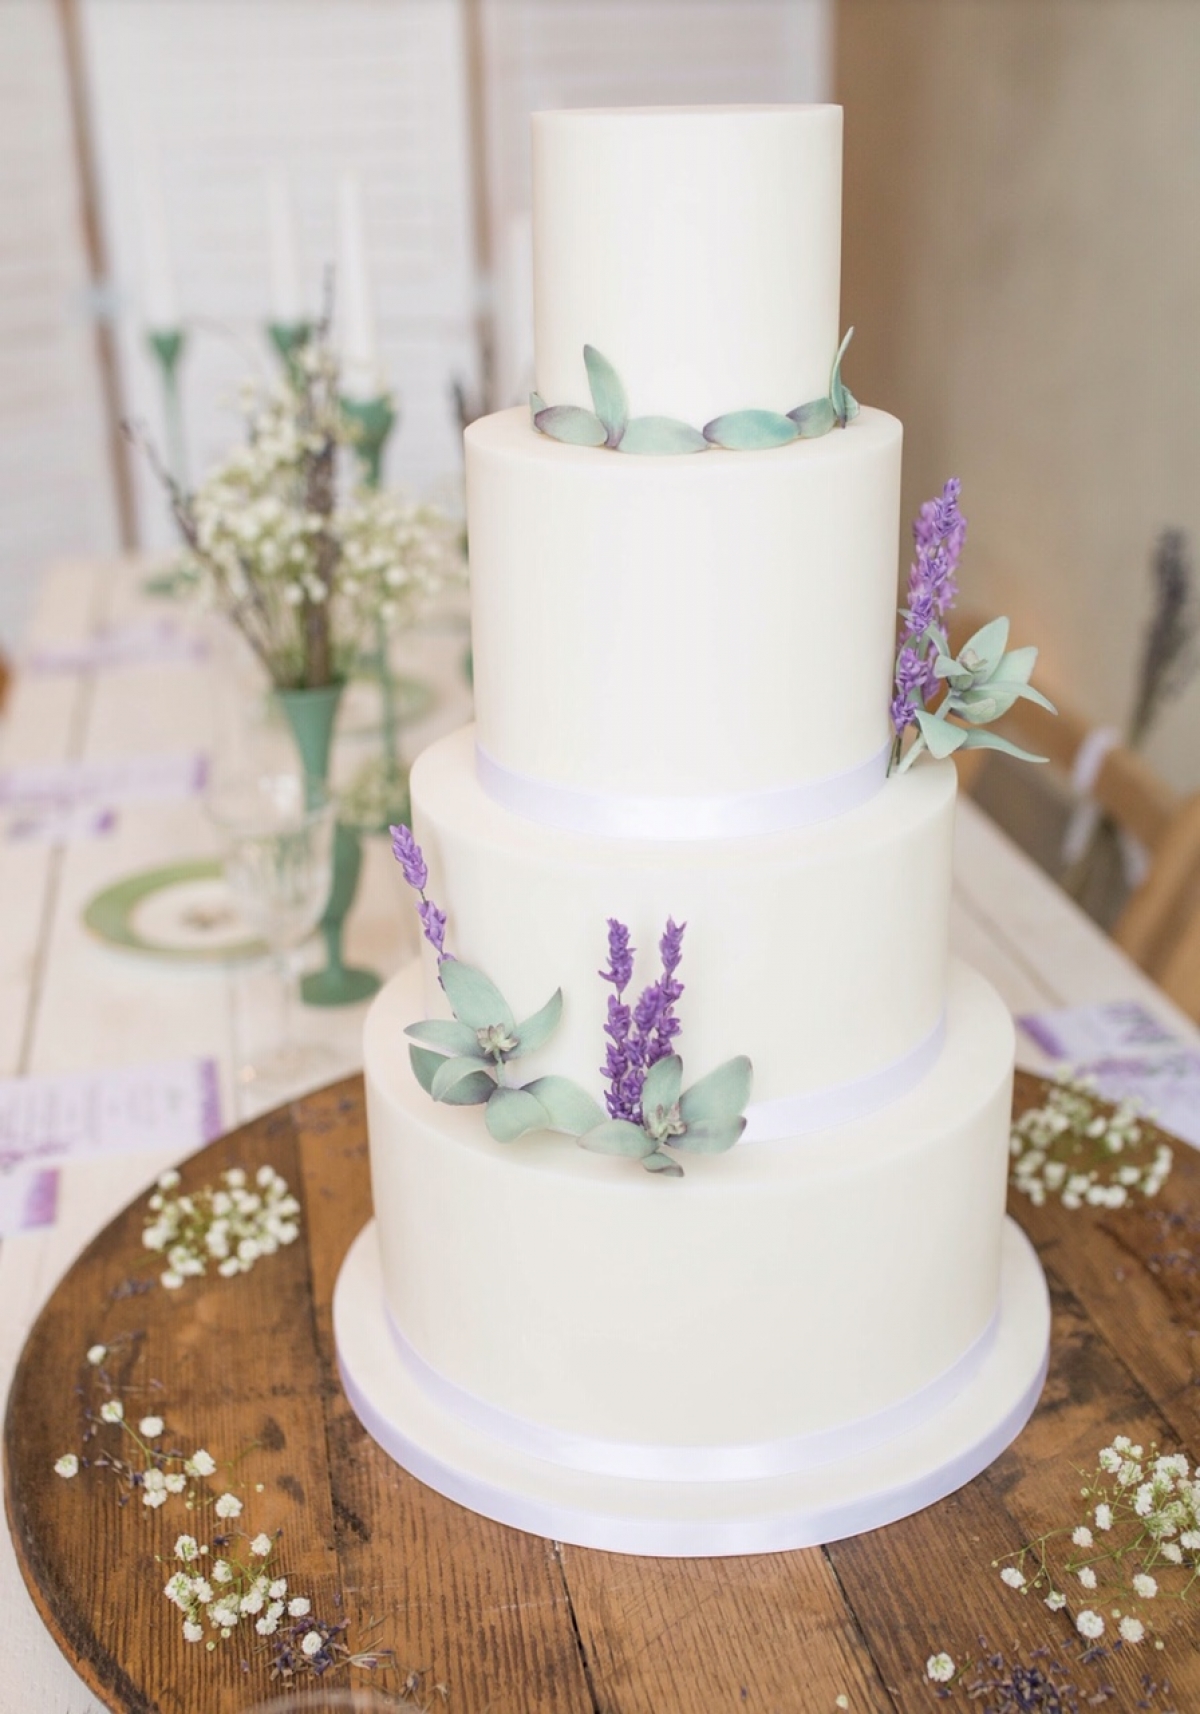 15% off your wedding cake with Claire's Sweet Temptations